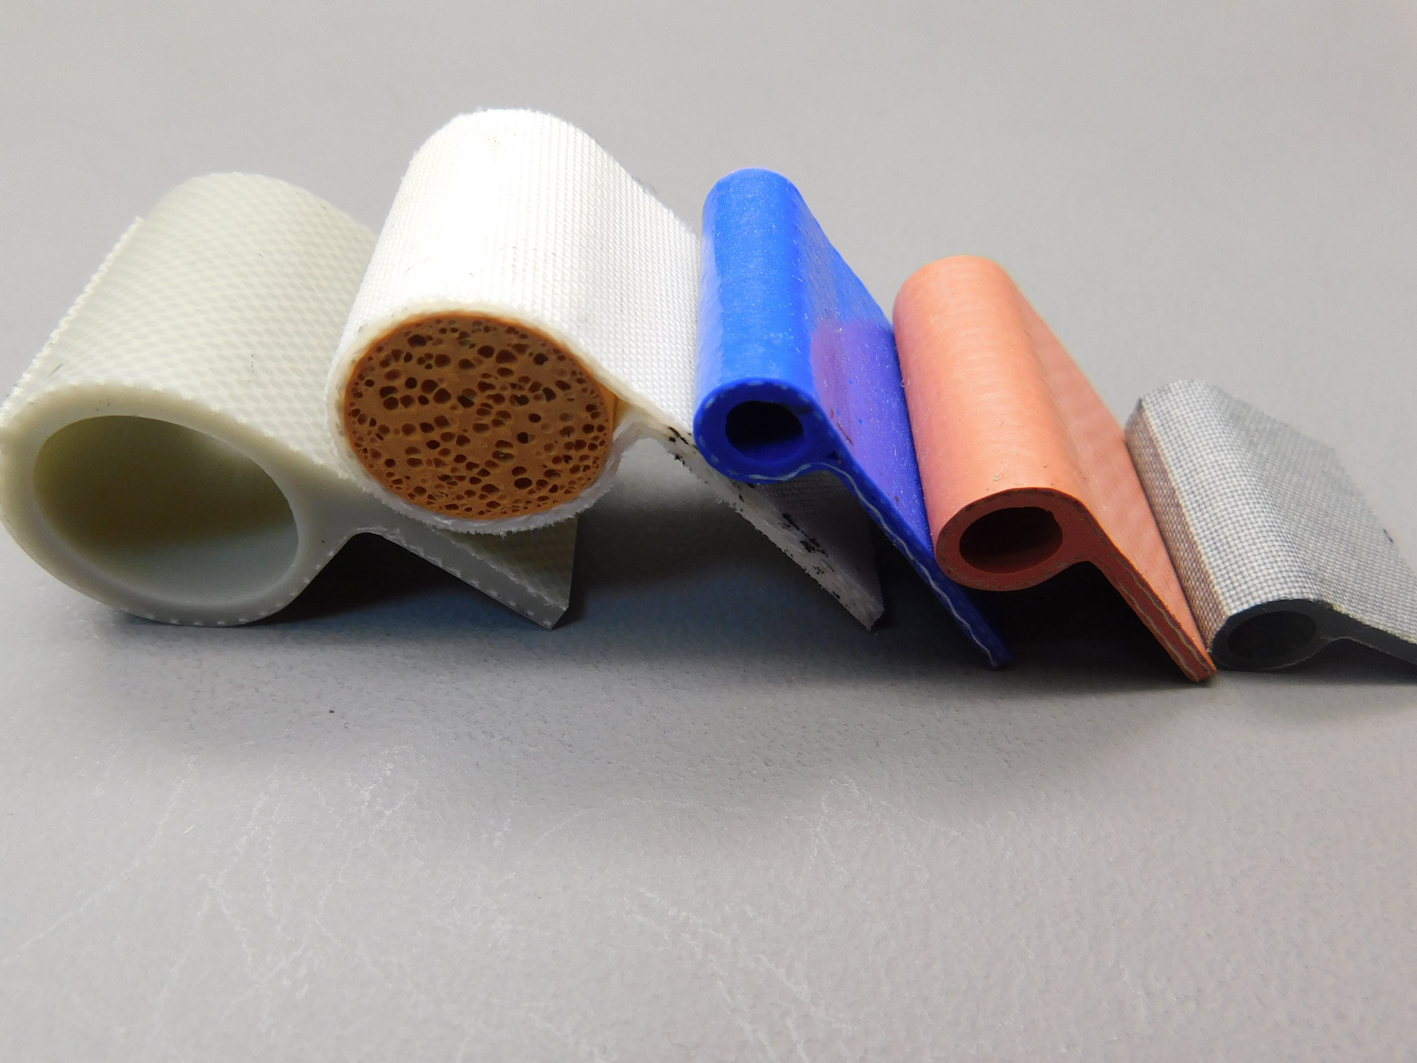 Fabrics substantially reinforce aerospace hoses and contribute to their durability. © Baltex